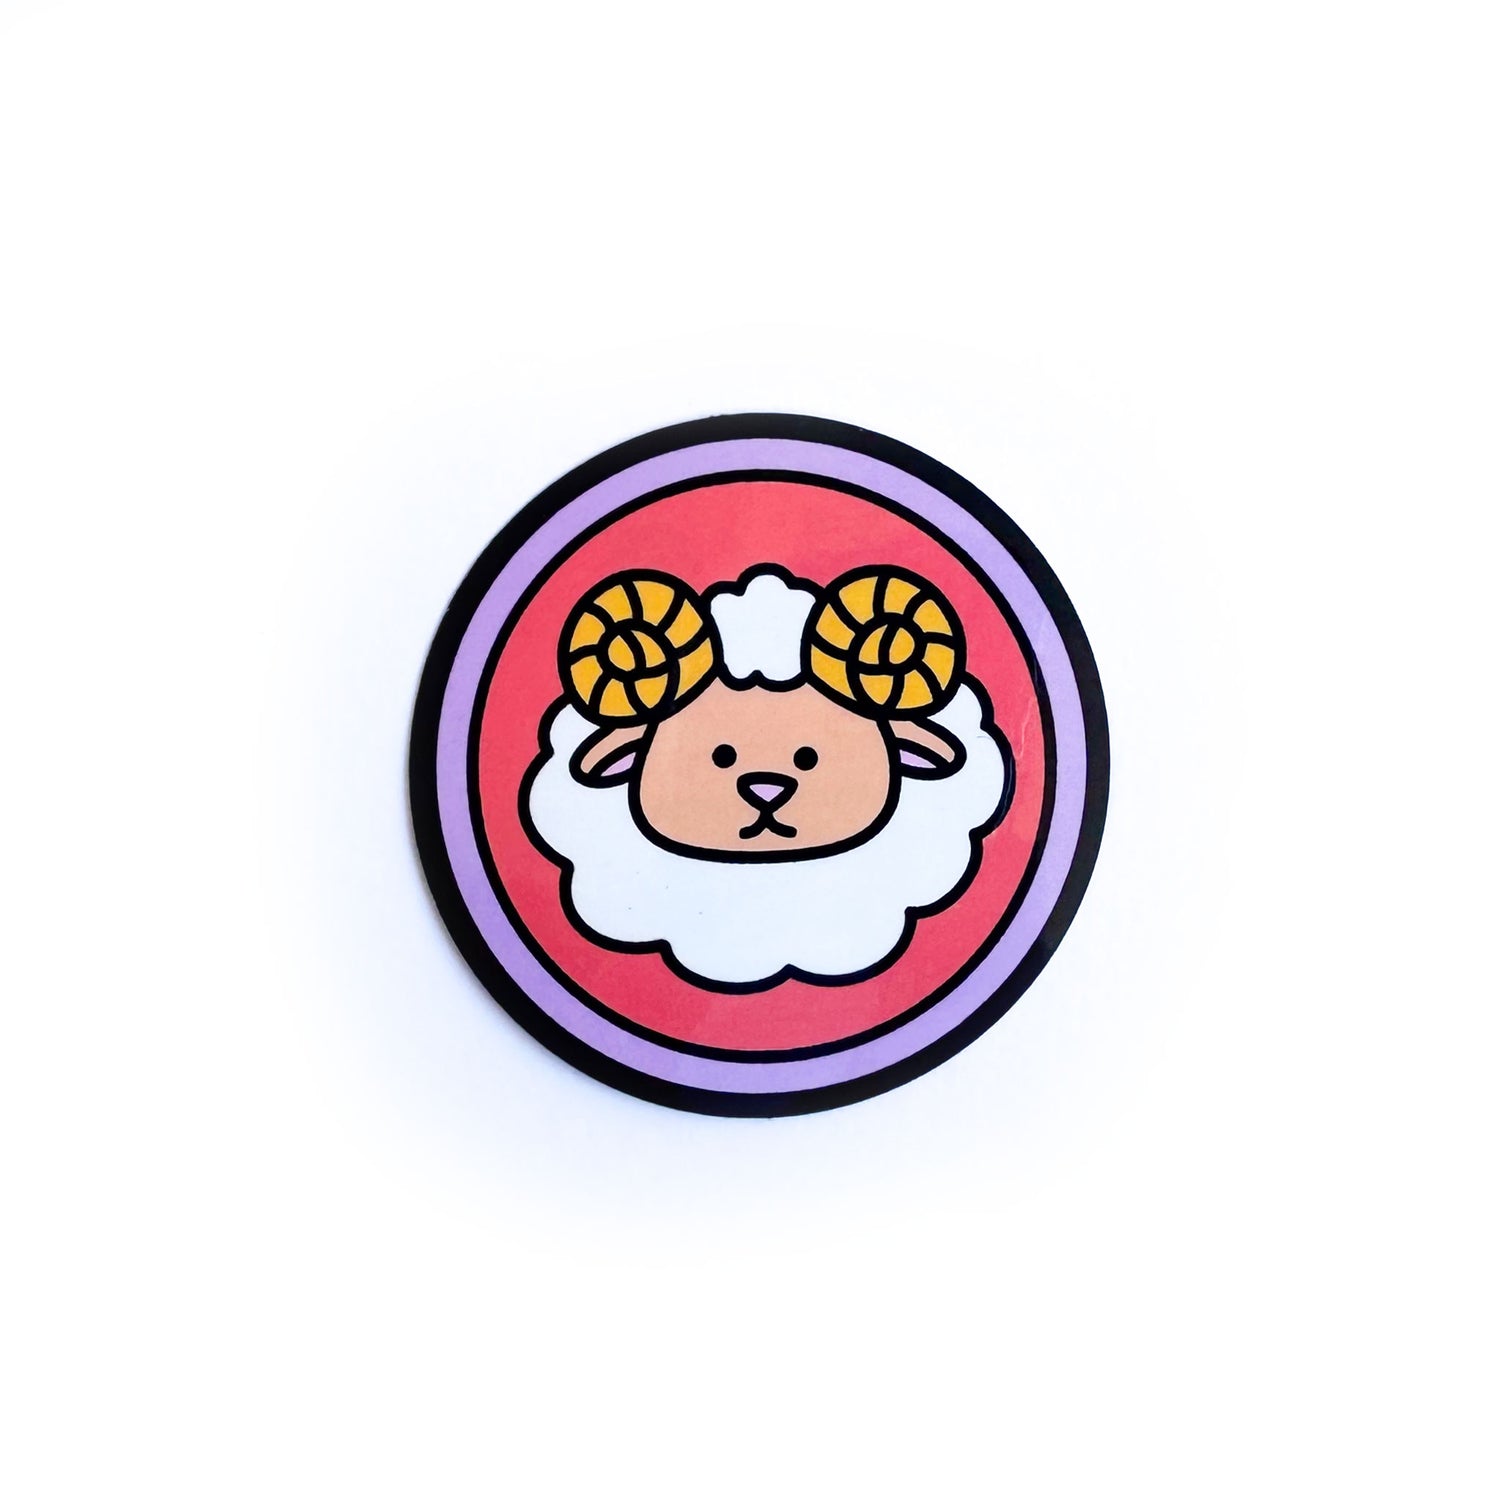 A circular sticker with a cute sheep on it to symbolize the Aries zodiac sign. 